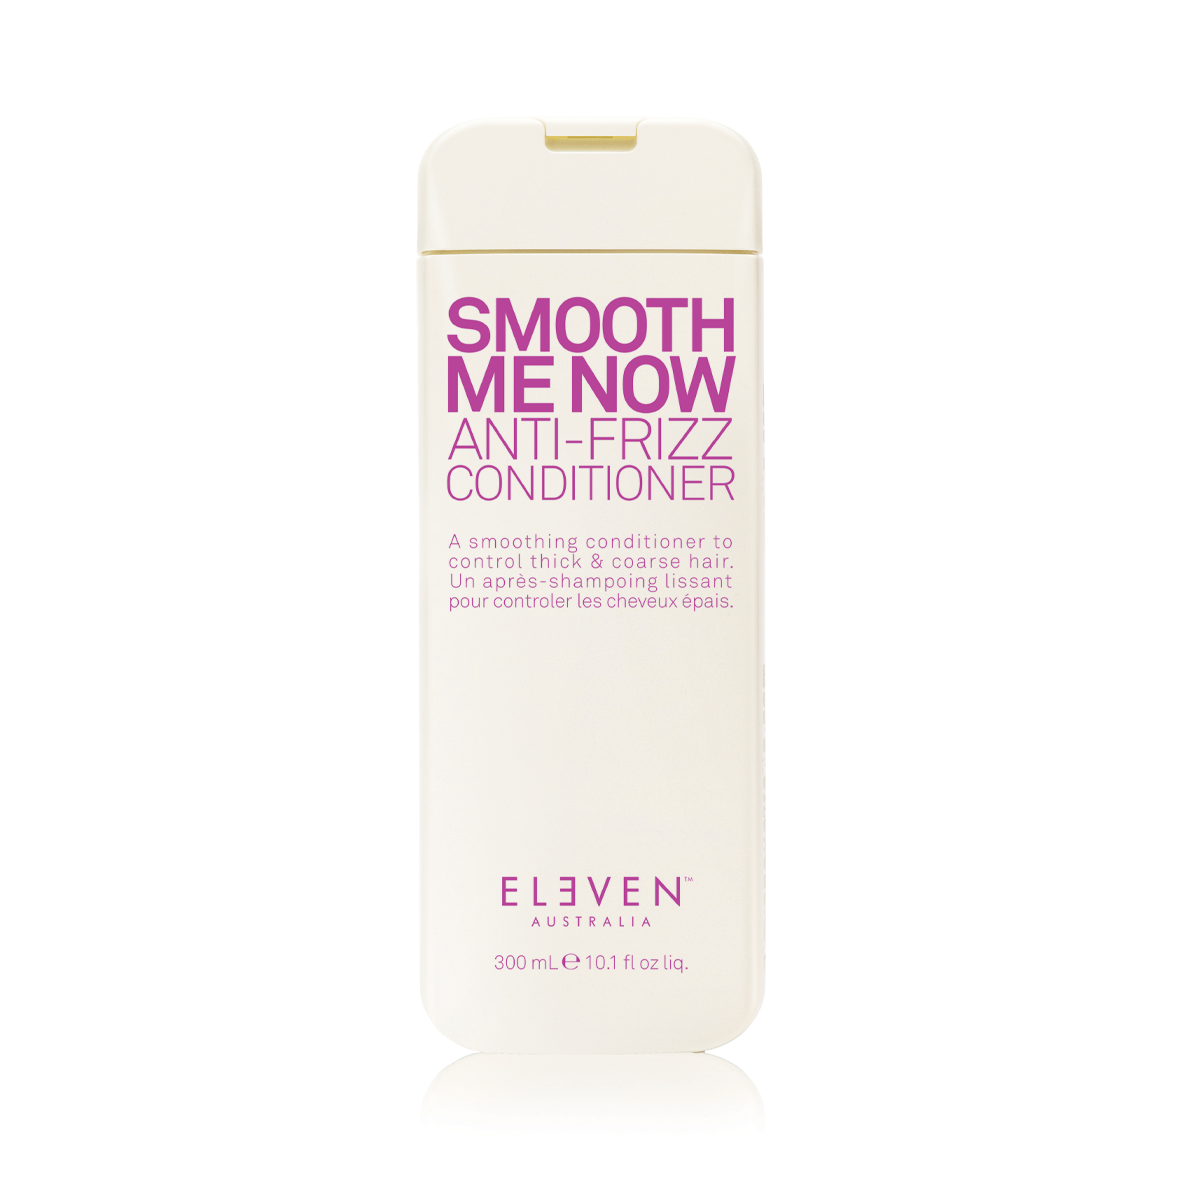 ELEVEN SMOOTH ME NOW ANTI-FRIZZ CONDITIONER